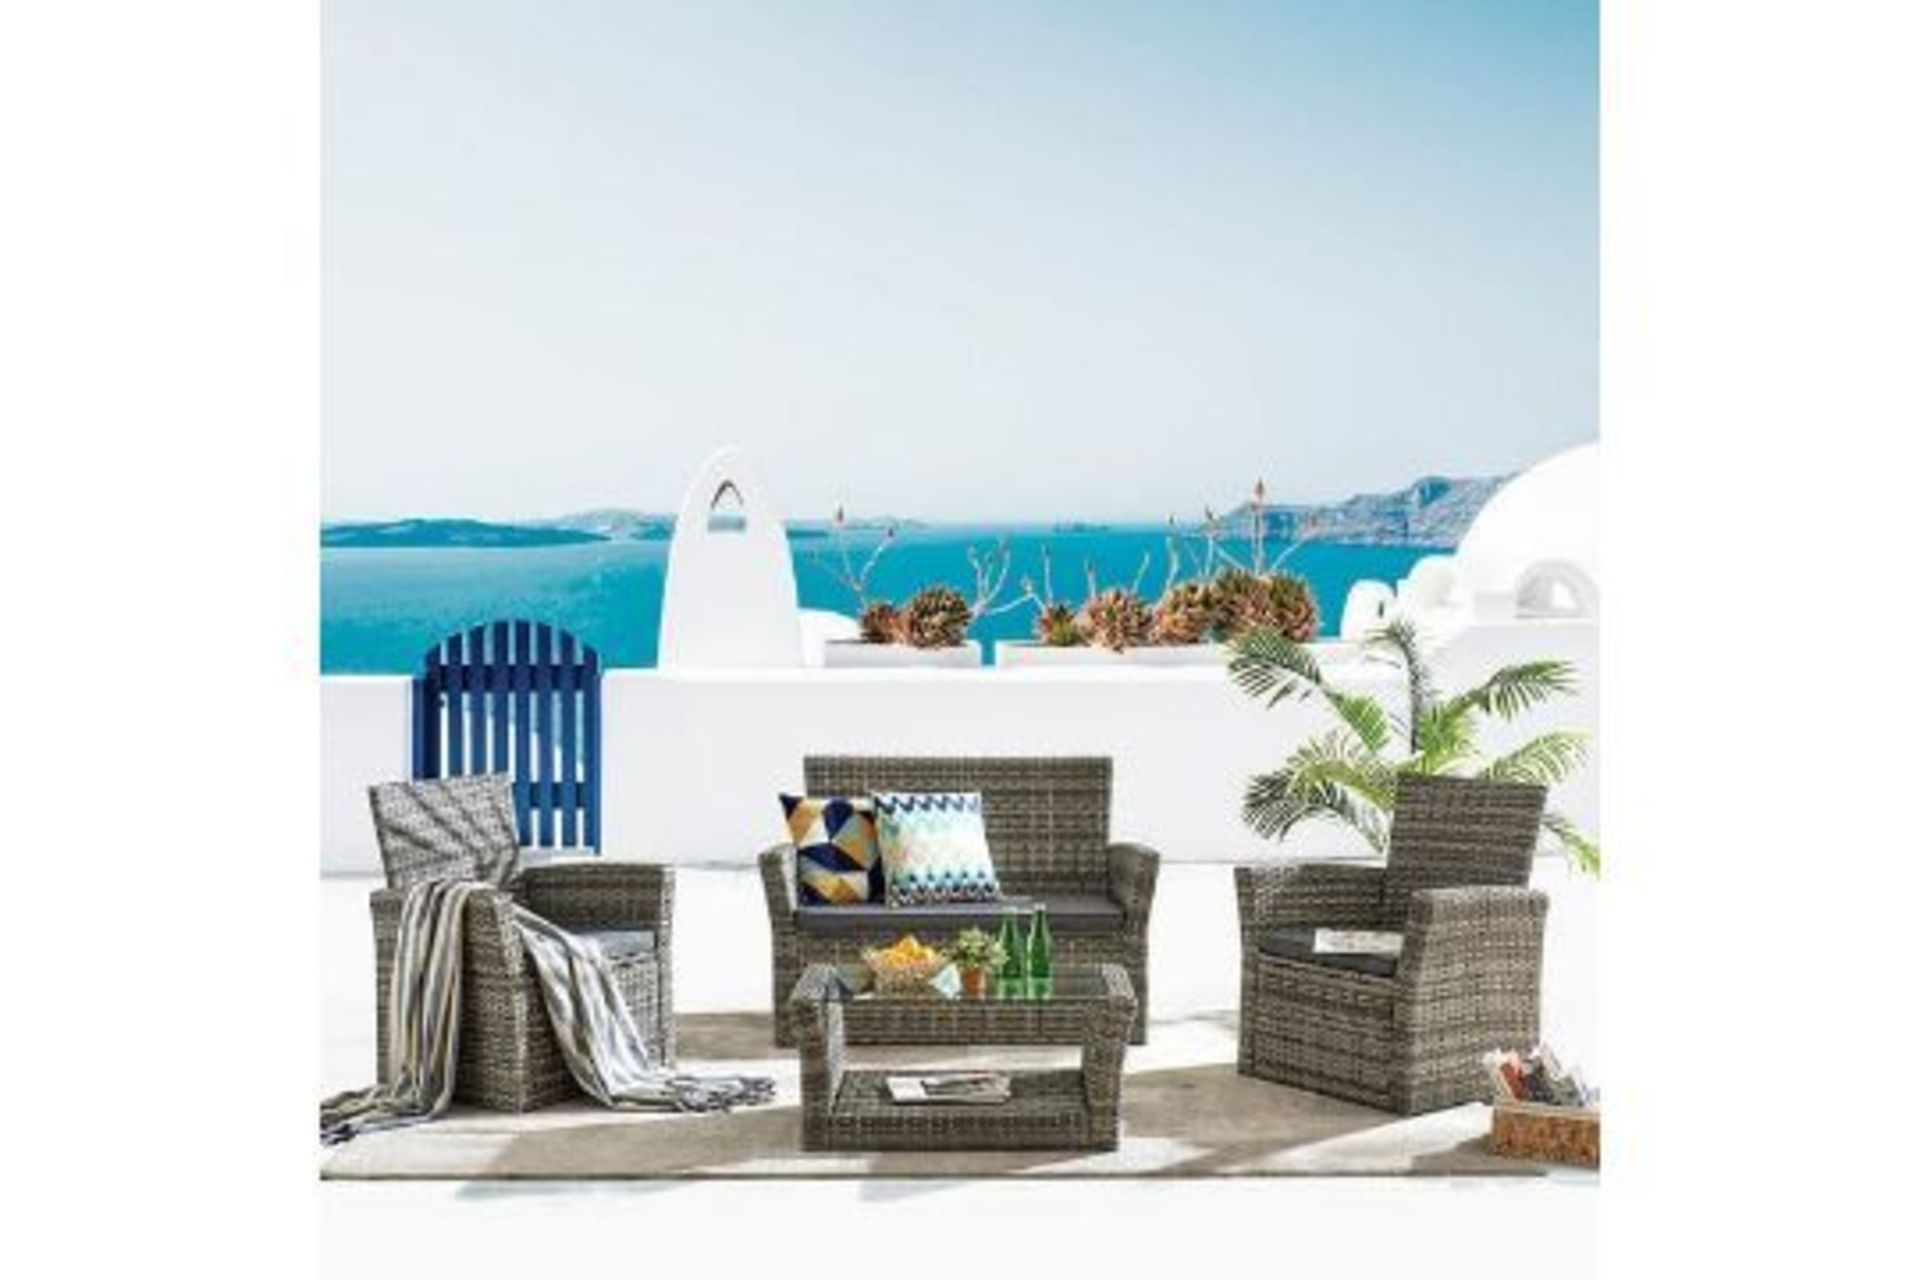 New Boxed Corfo 4 Seater Garden Furniture Set in Grey. The 4-piece garden furniture set includes a - Image 2 of 4